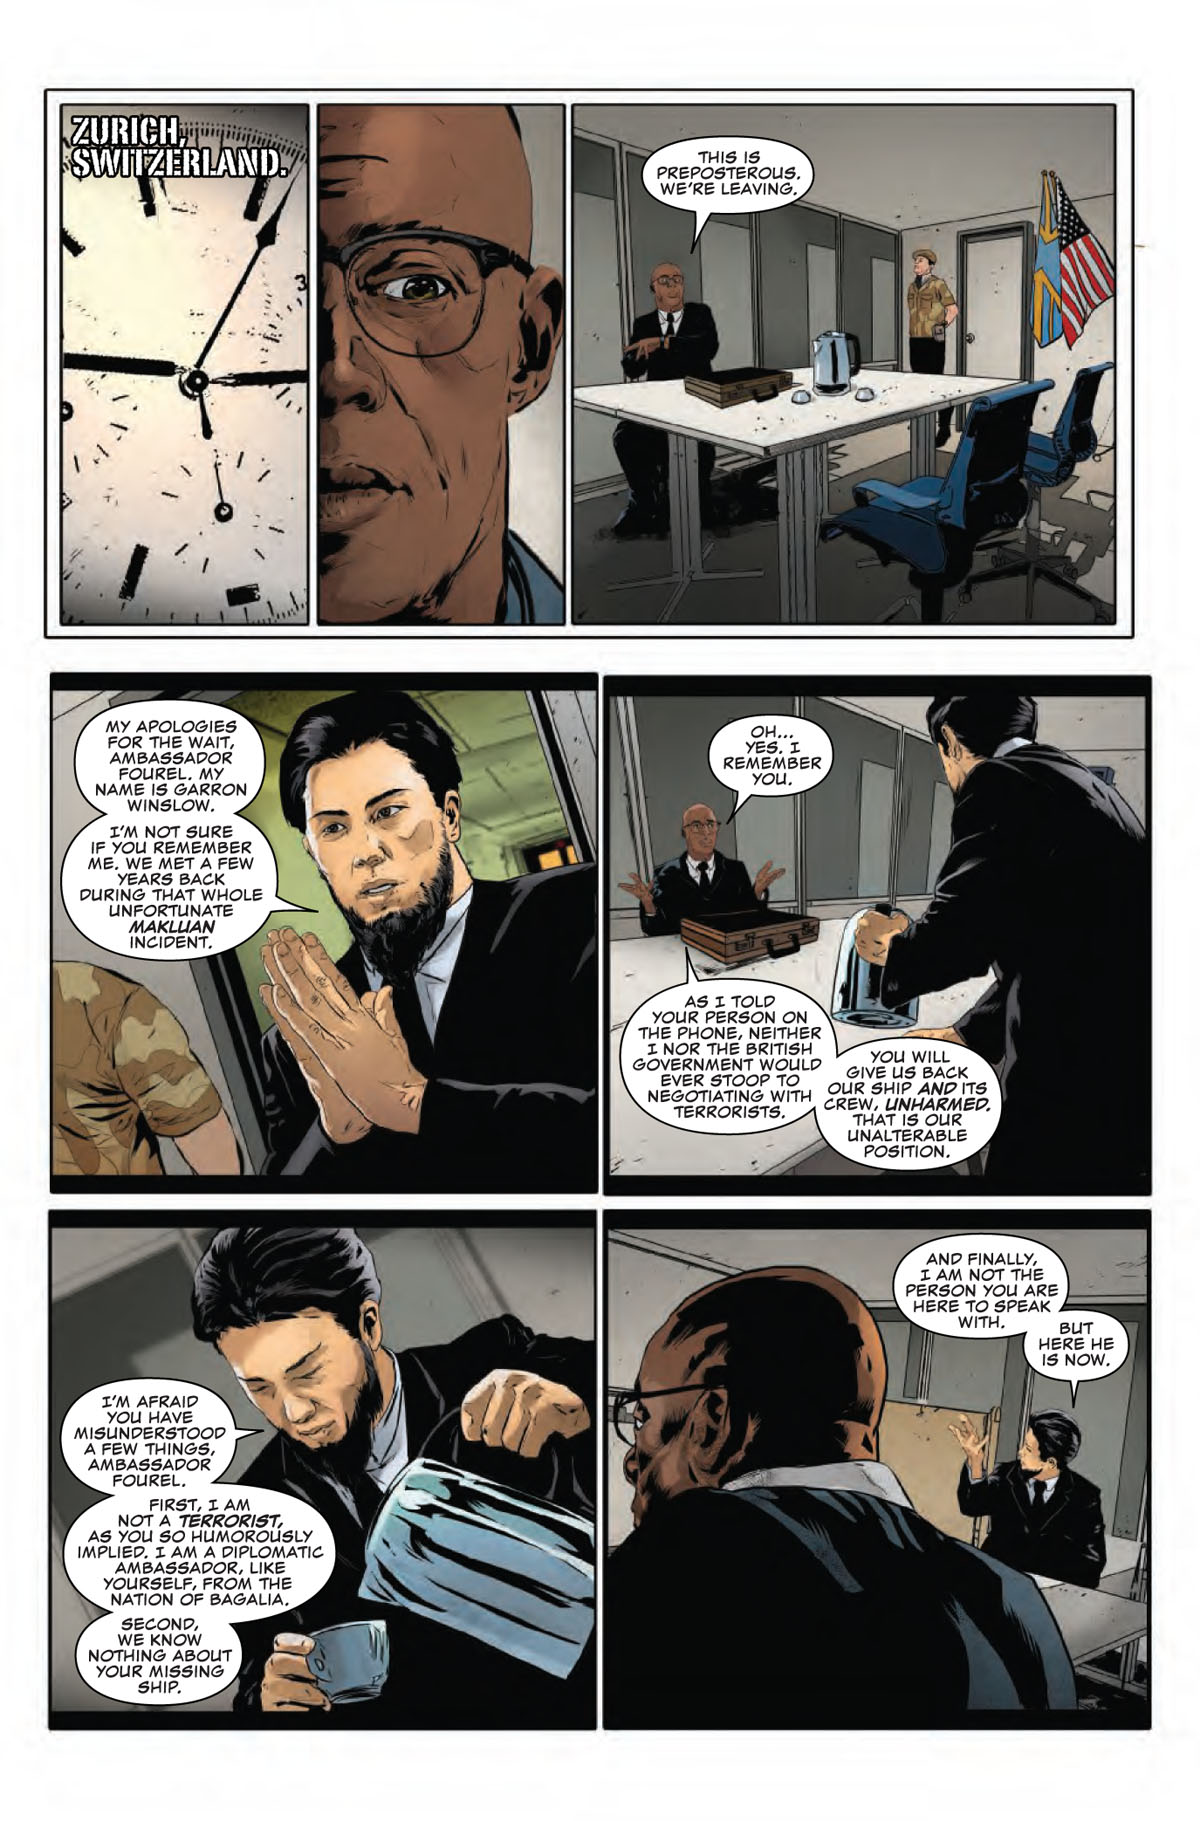 The Punisher #1 page 1